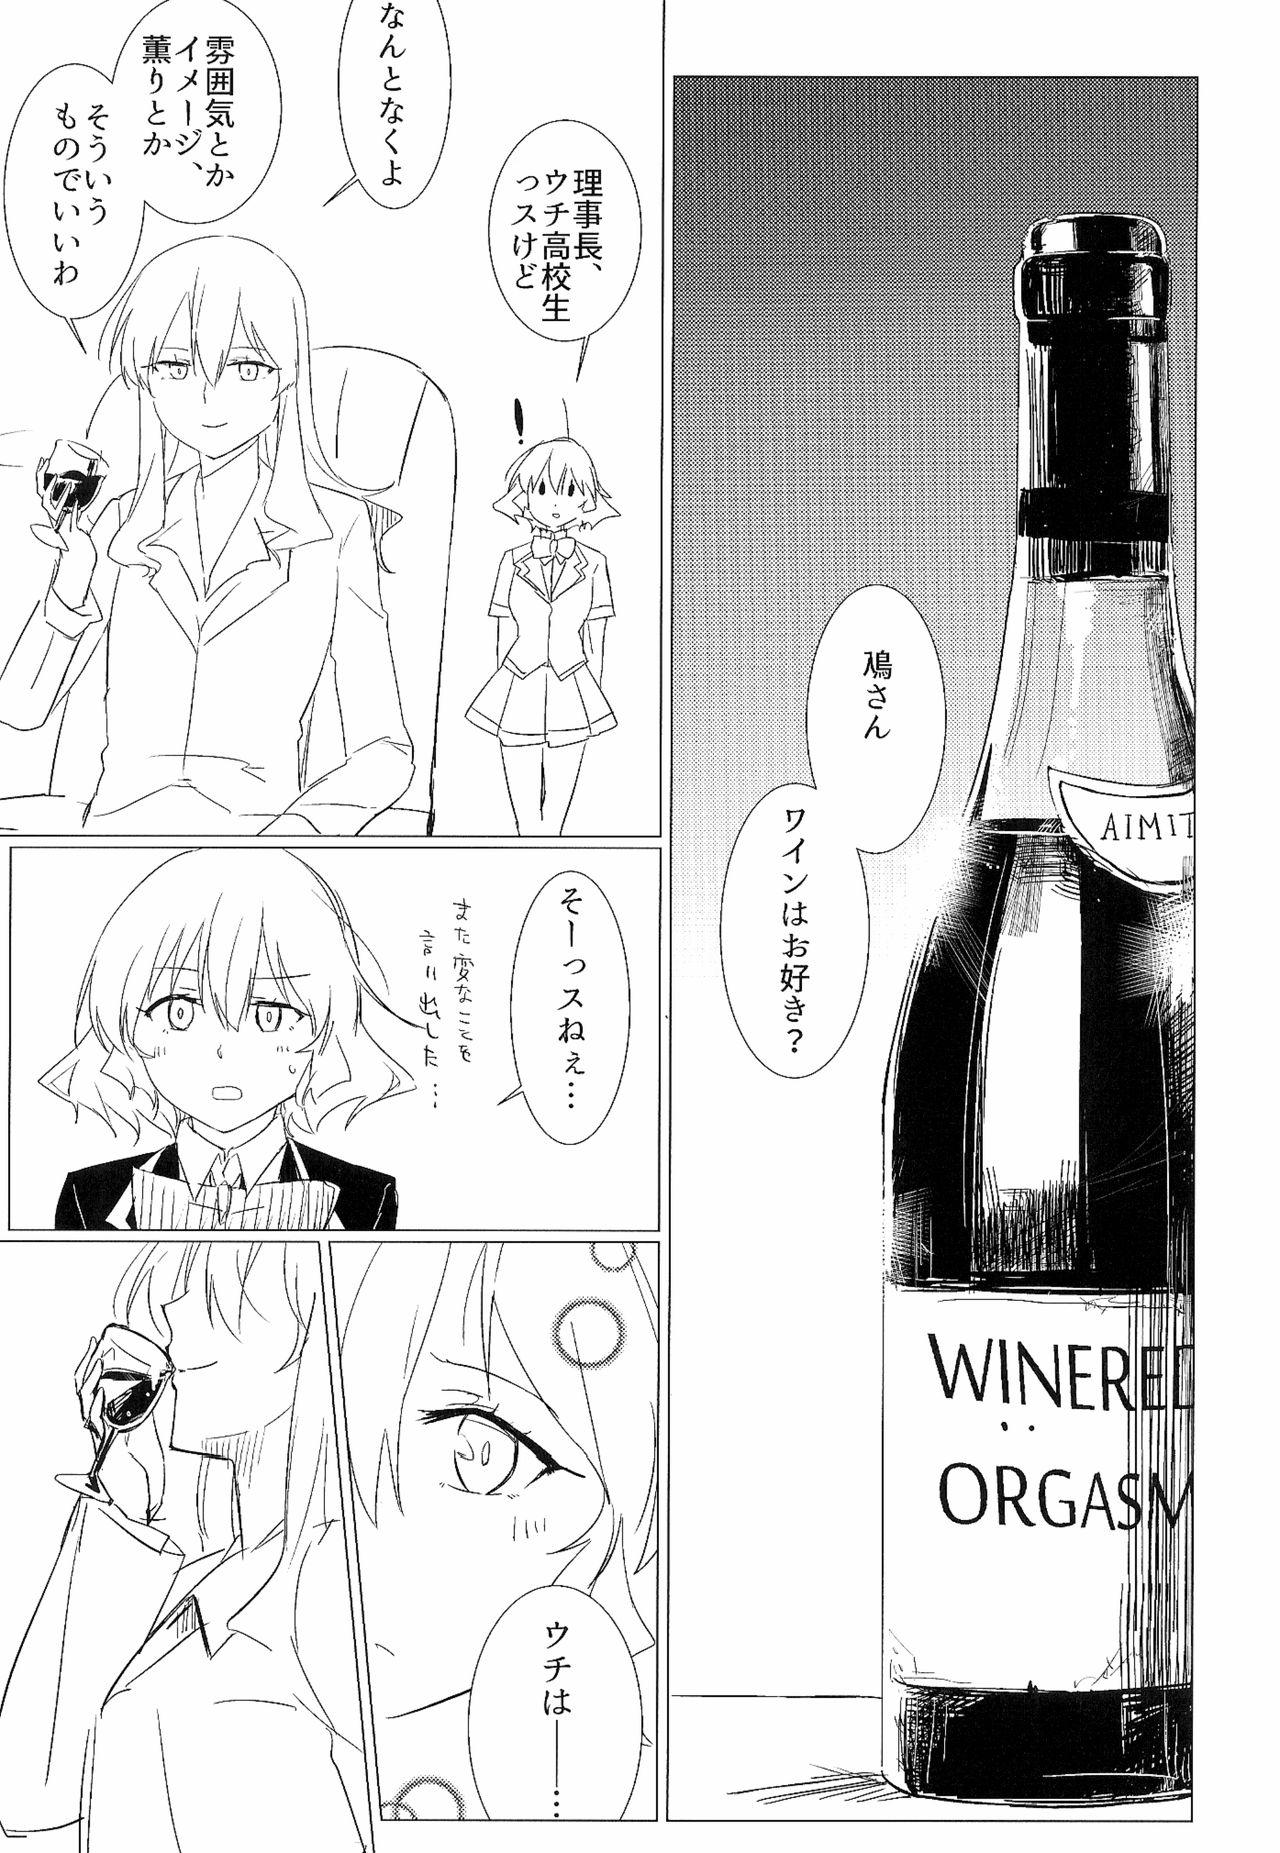 Casting Wine-Red Orgasm - Akuma no riddle Edging - Page 3